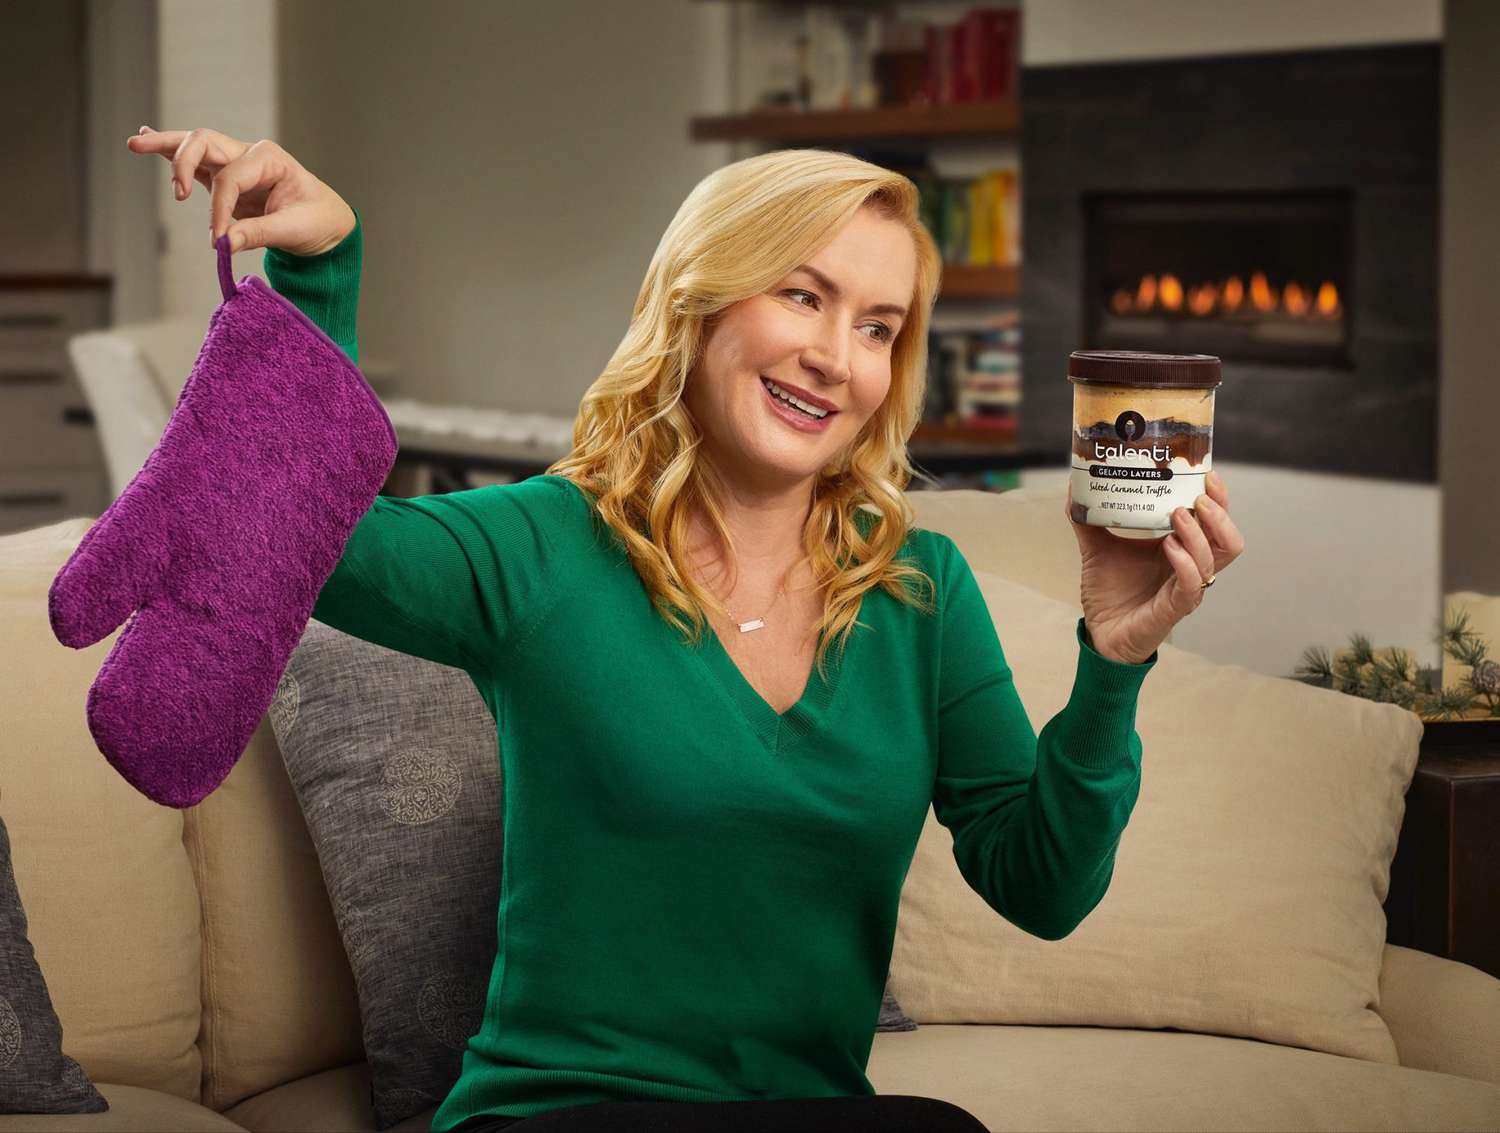 angela is swapping her meh gift for a pint of talenti